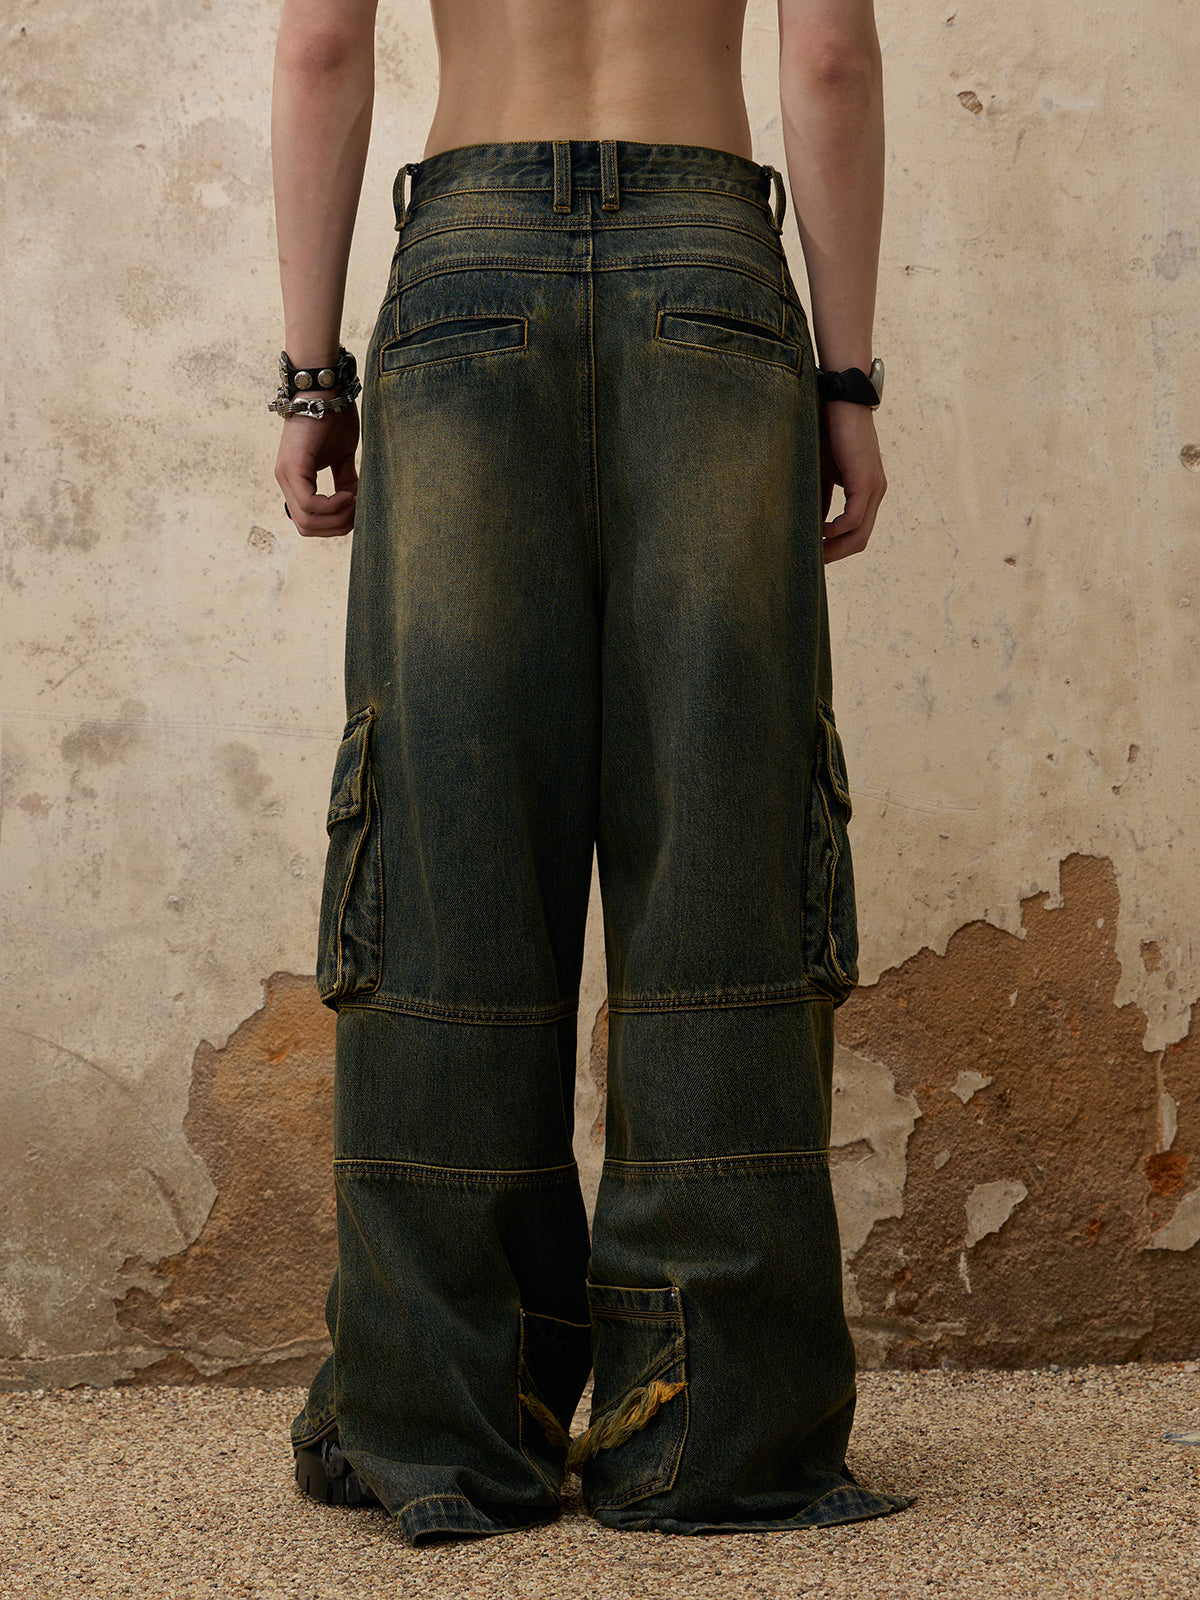 Personsoul Fade Wash Overall Denim Jeans